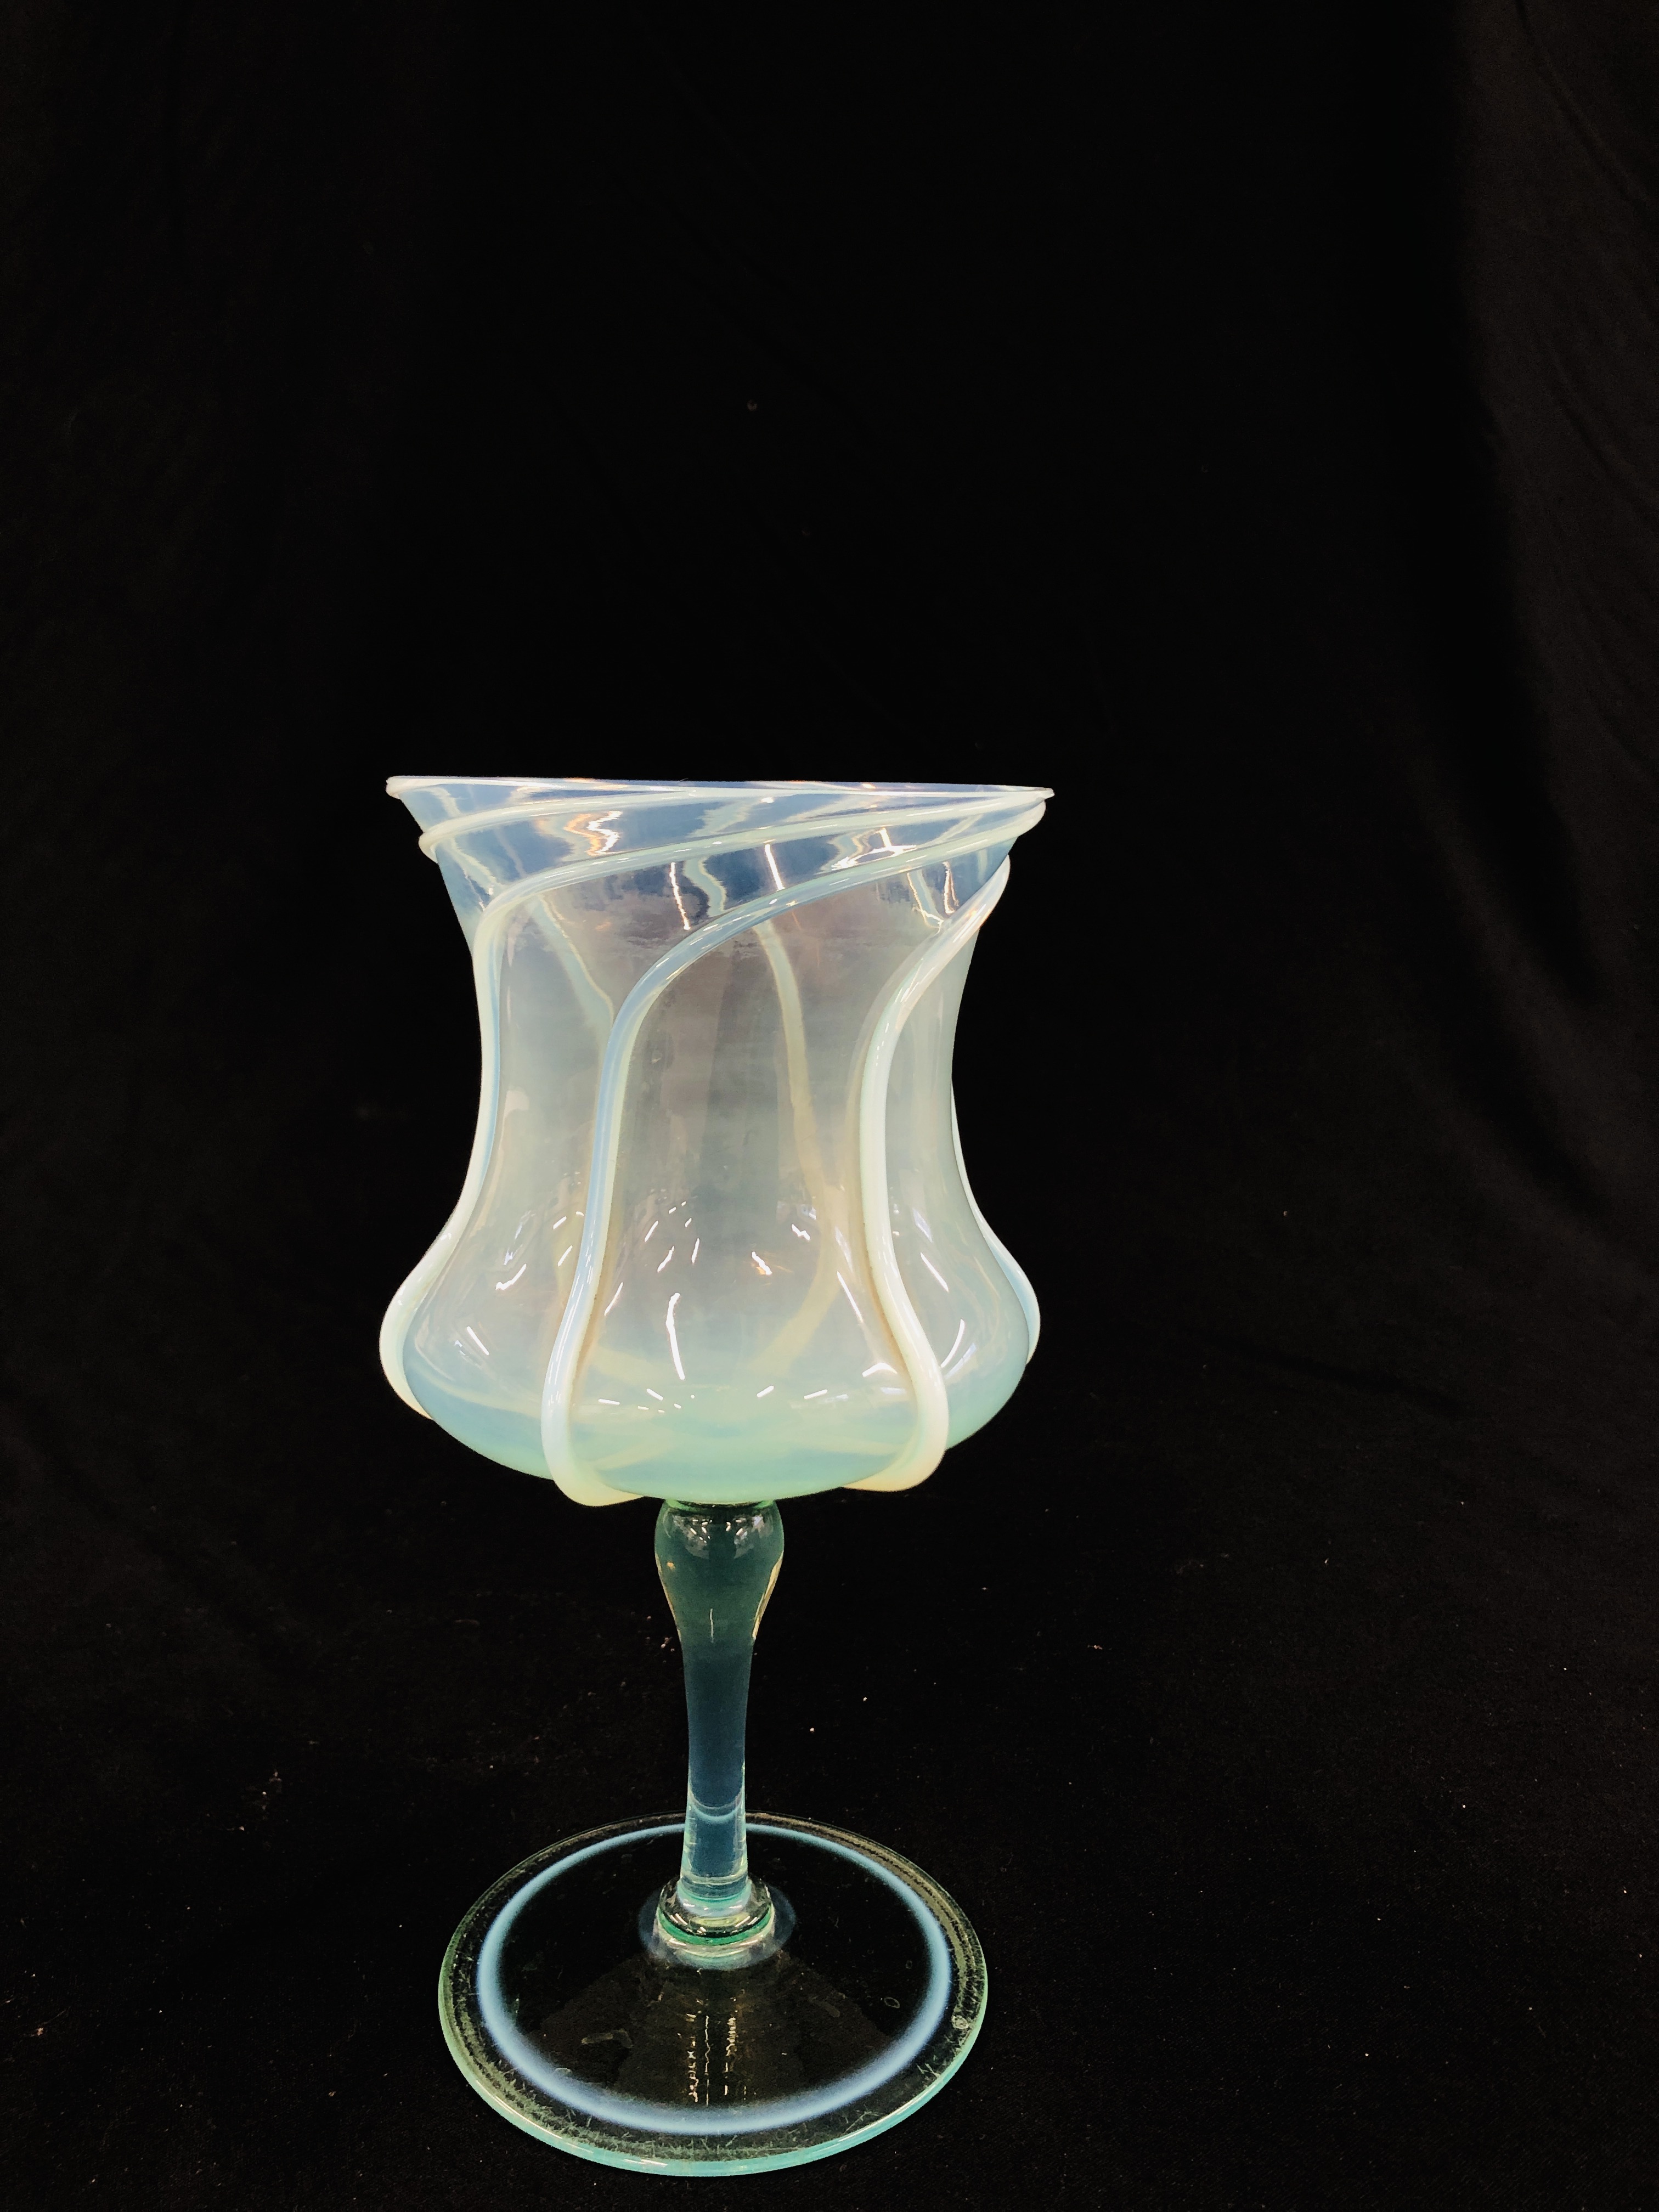 A VENETIAN GOBLET, PALE GREEN WITH SPIRAL OVERLAY ON THE THISTLE SHAPED BOWL, 23CM HIGH.